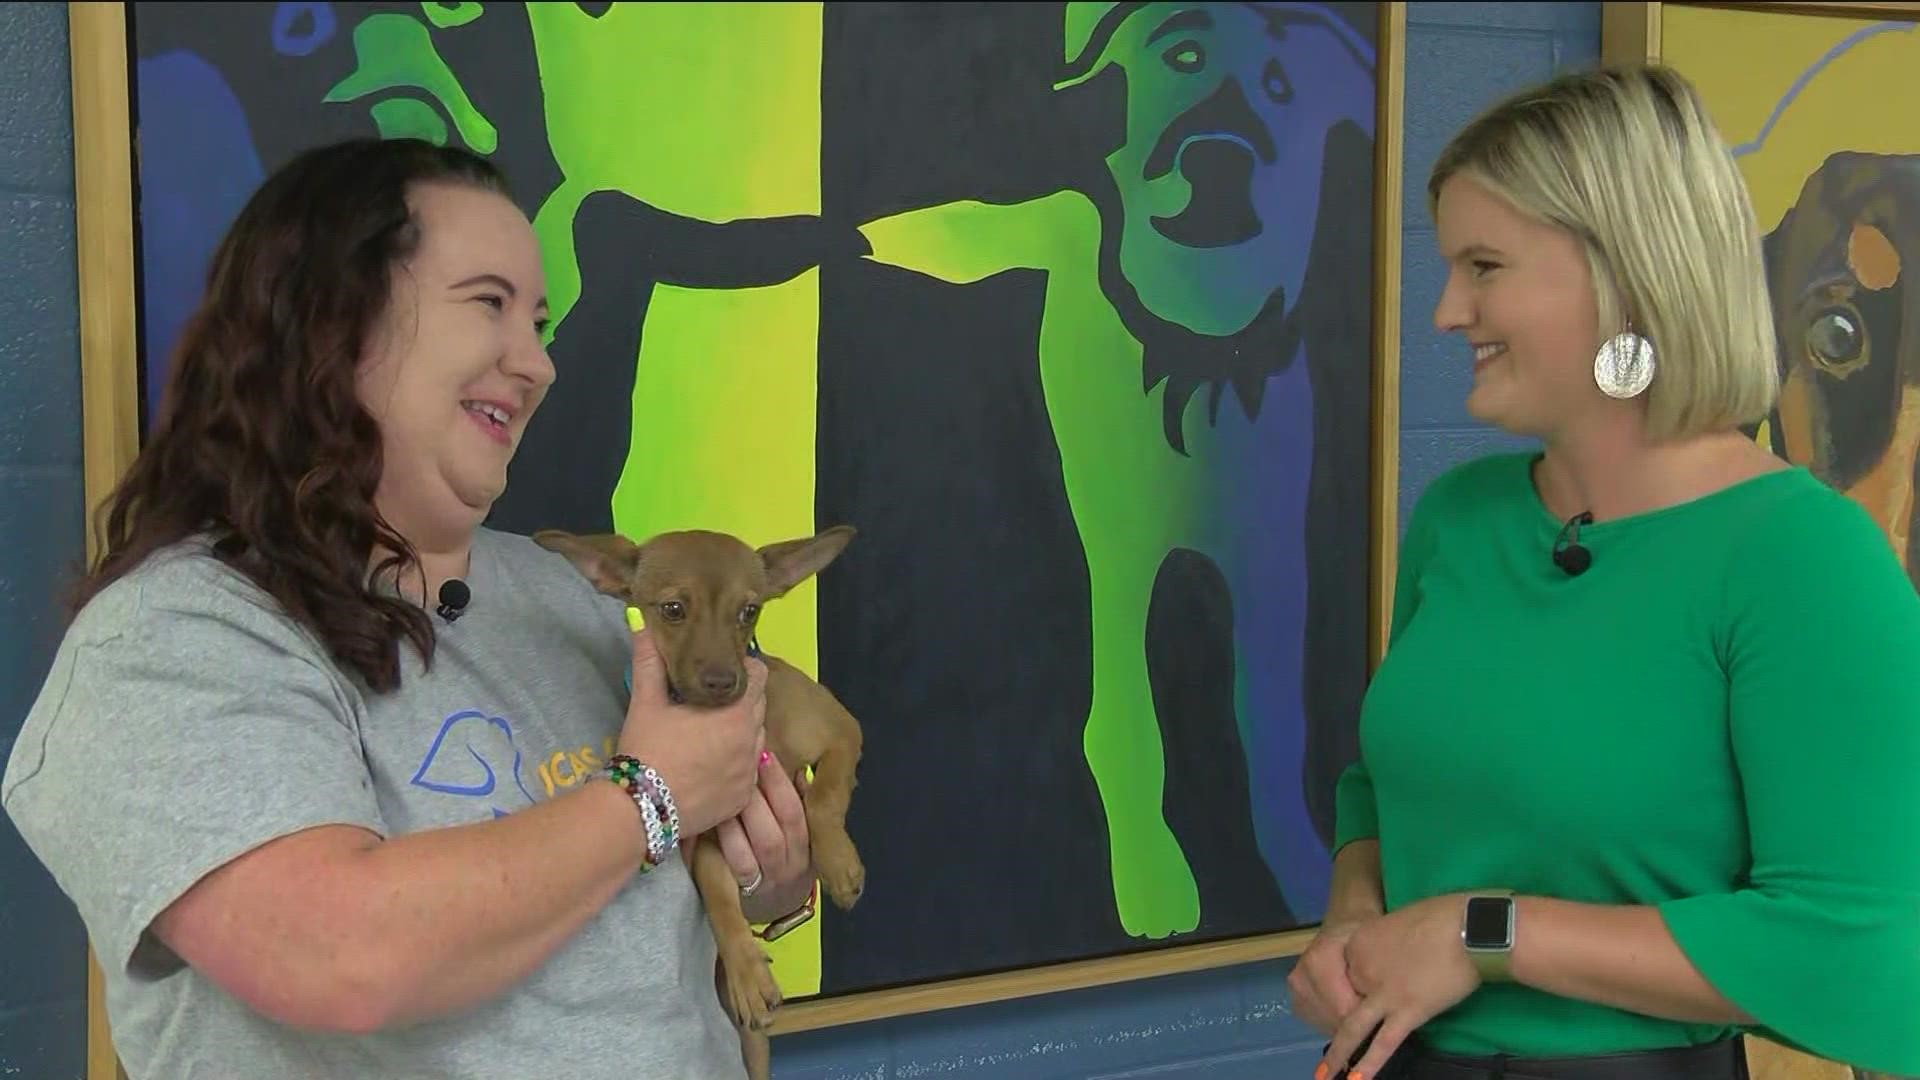 With the adoption center over-filled, the center is offering adoptions for as little as $25.